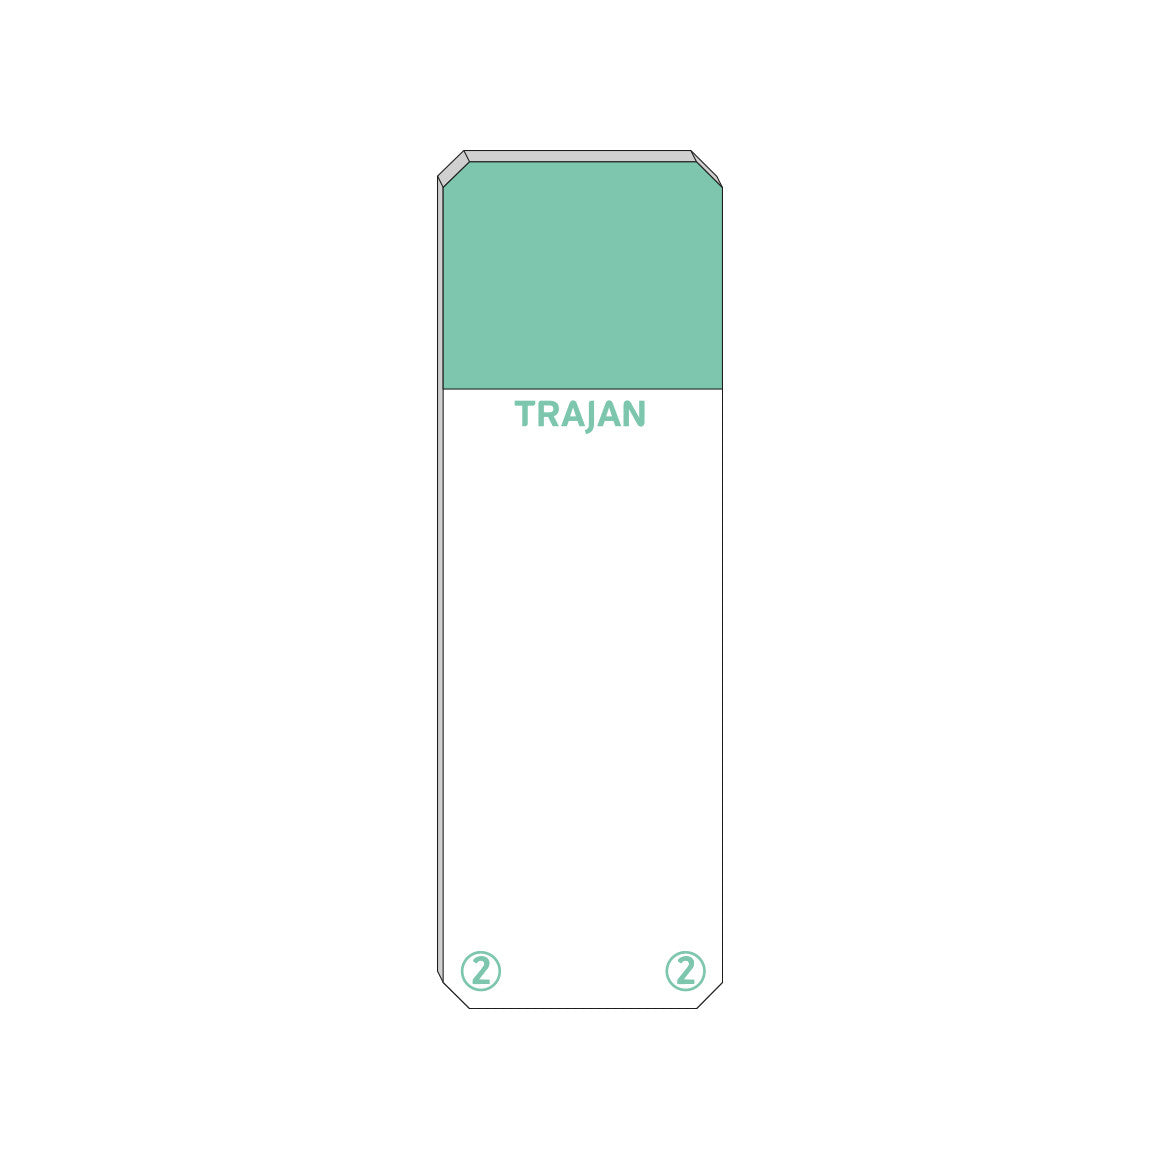 Trajan Scientific and Medical, Series 2 Adhesive Microscope Slides, Green, Frost 20 mm, 76 mm x 26 mm